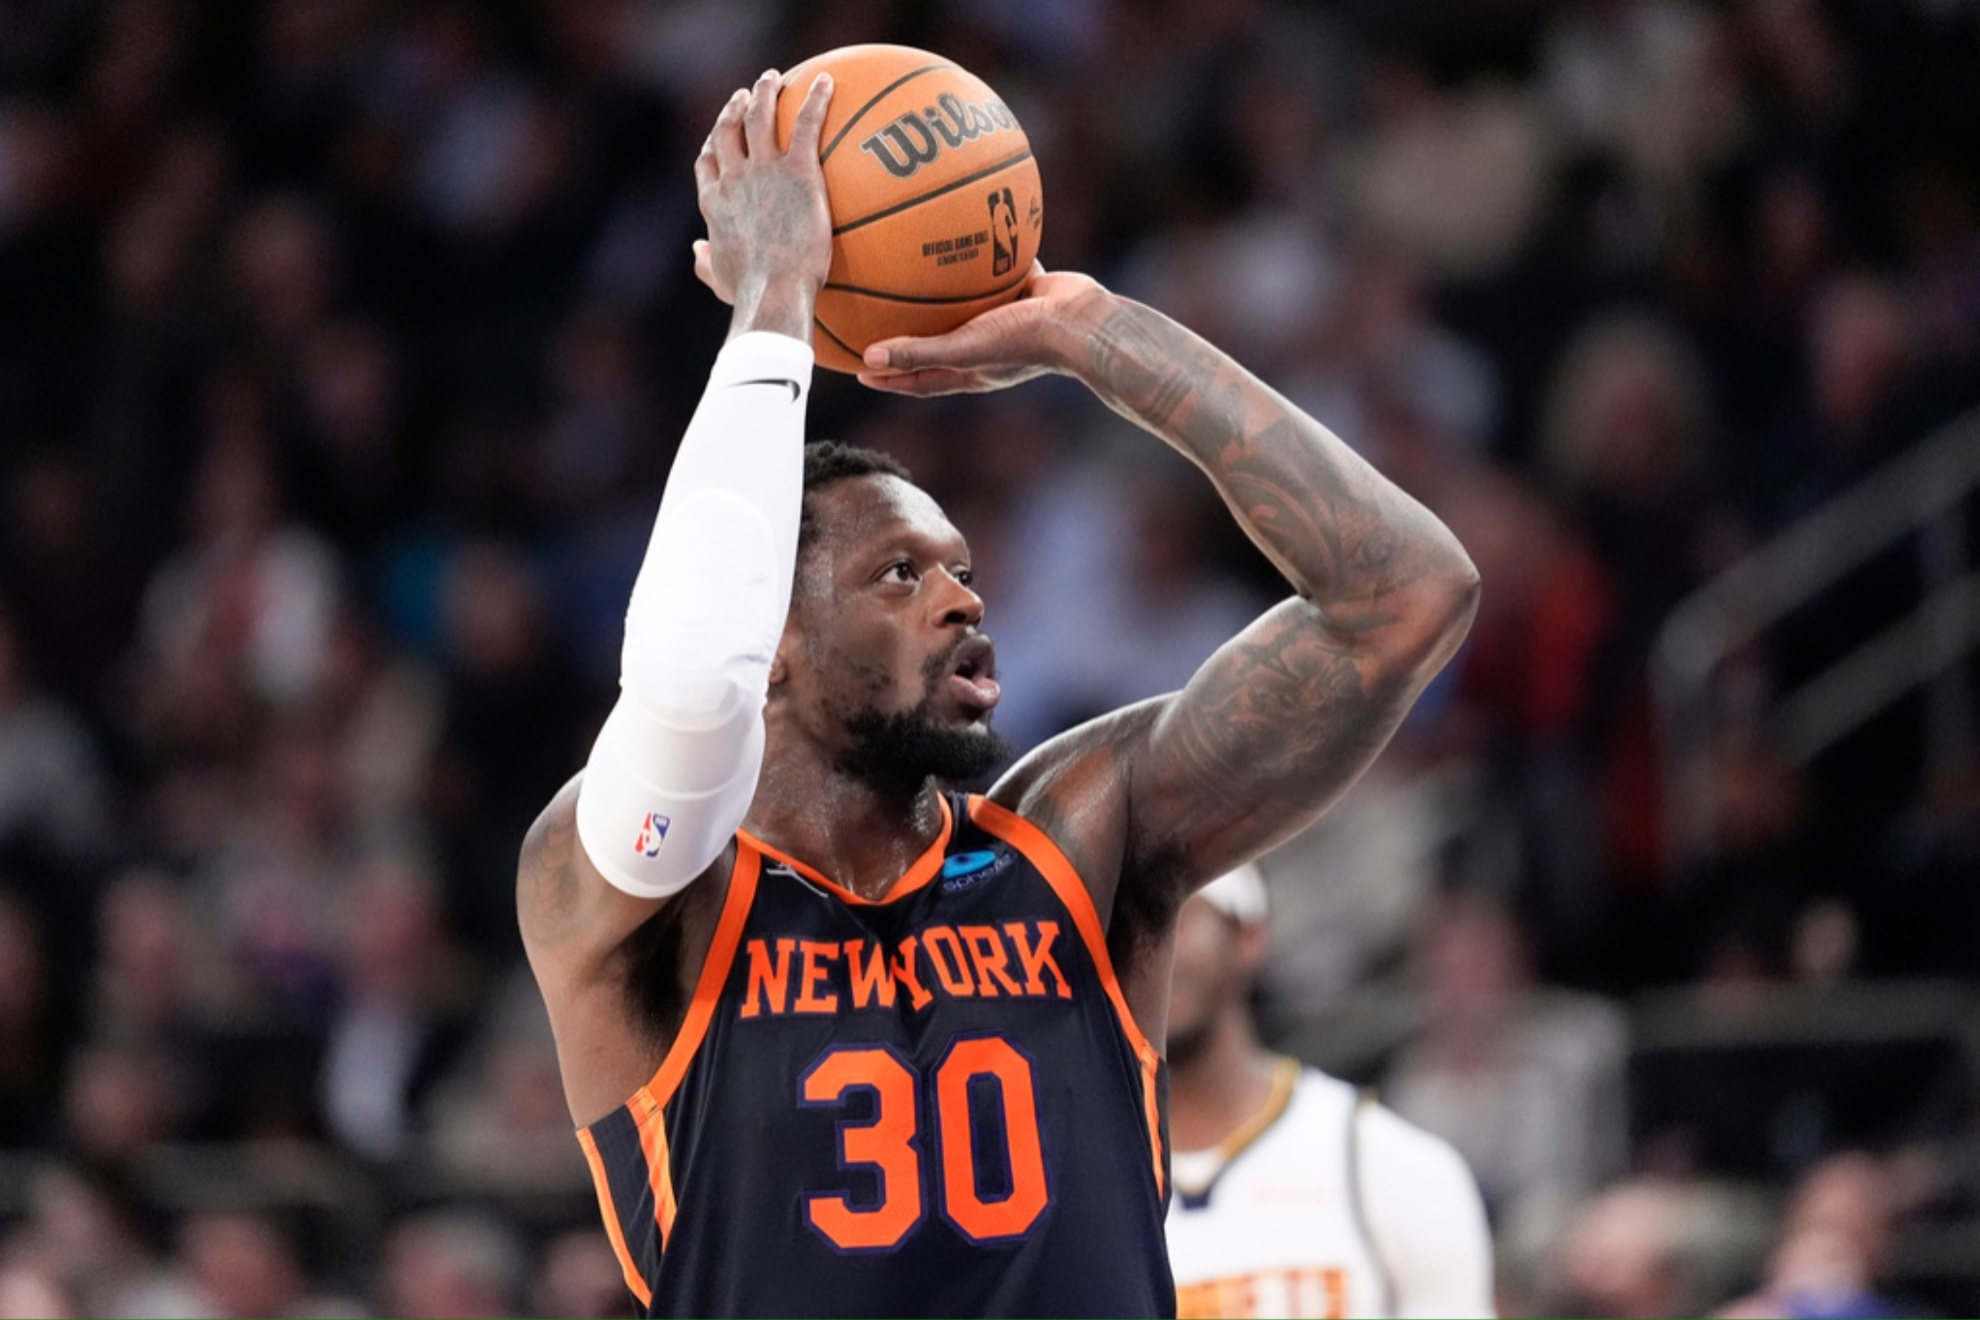 New York Knicks star Julius Randle injured his right shoulder in Saturdays game against the Miami Heat